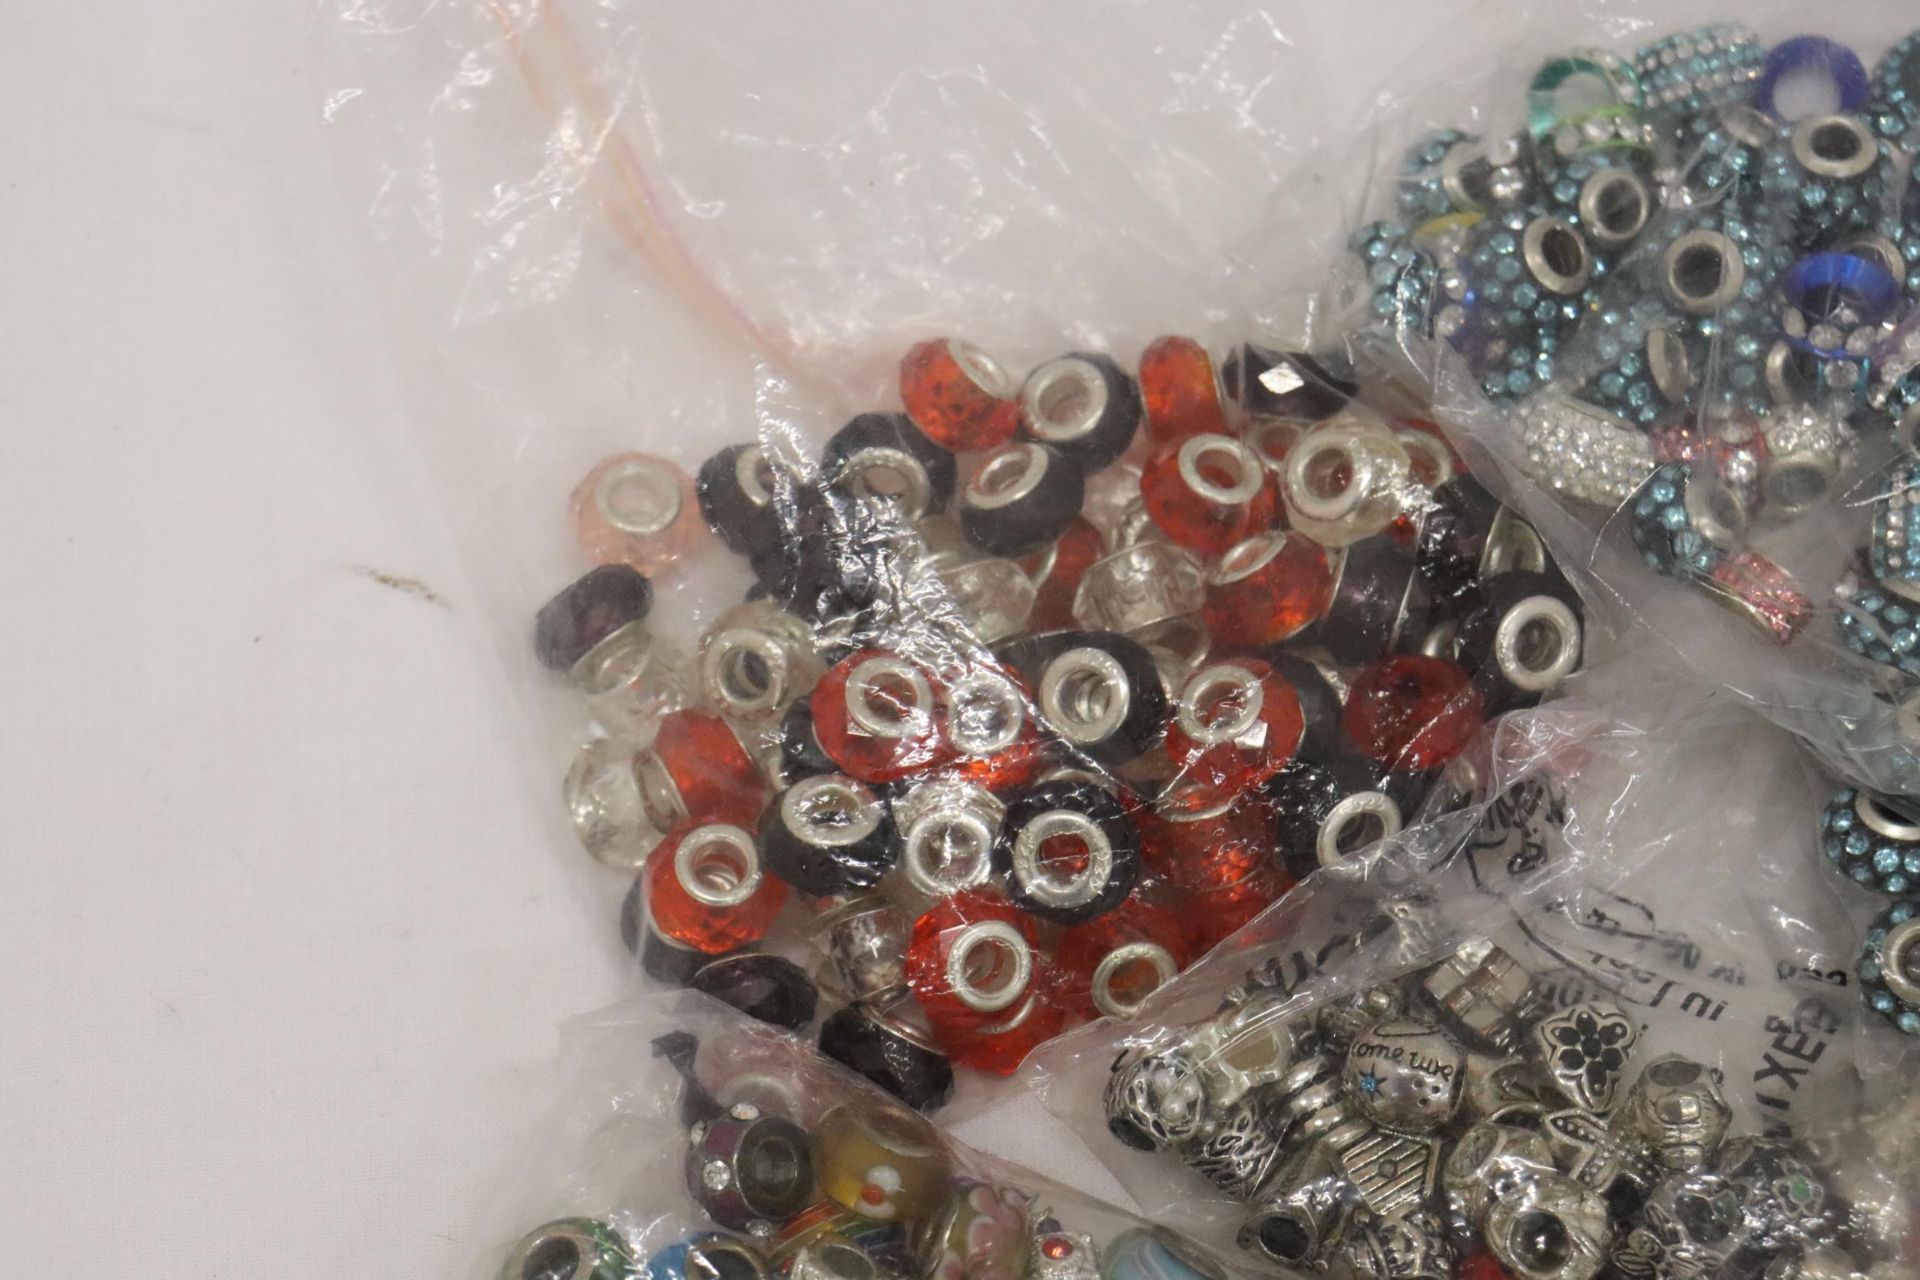 A LARGE QUANTITY OF PANDORA STYLE BEADS, SOME MARKED 925 - Image 2 of 7